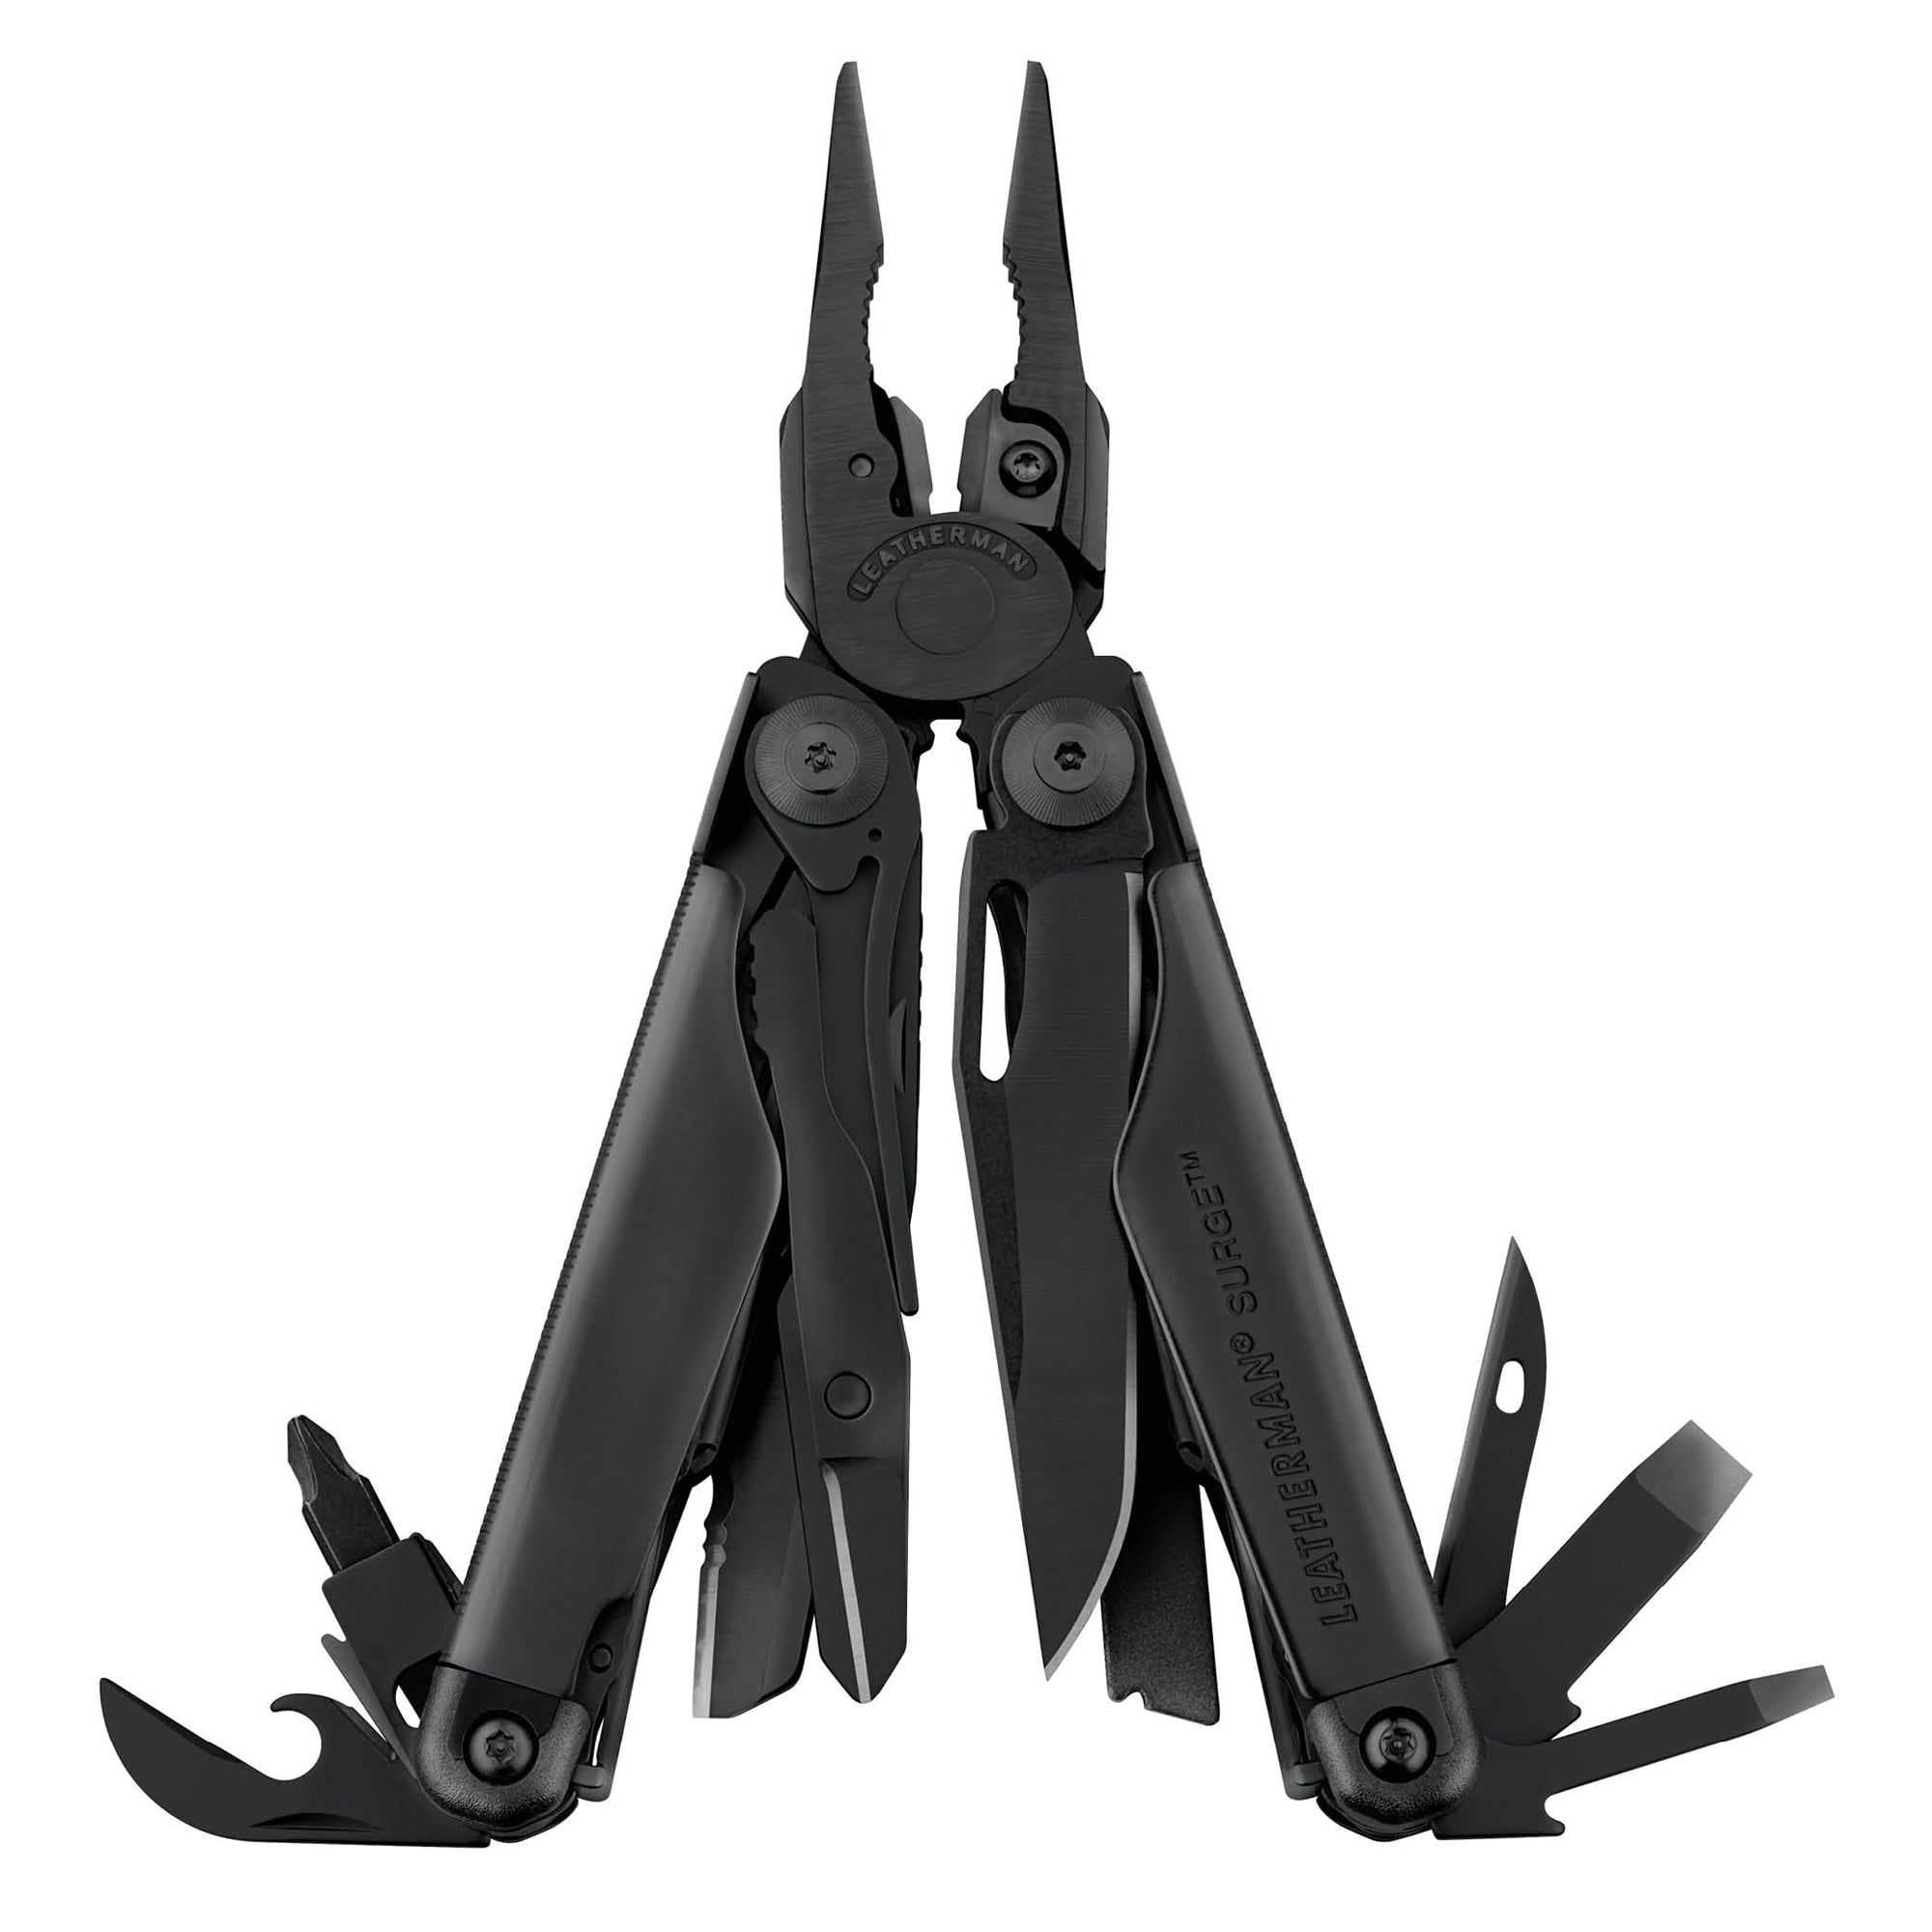 LEATHERMAN, Surge, 21-in-1 Heavy-Duty Multi-tool for Work, Home, Garden,  DIY & Auto, Black with MOLLE Sheath